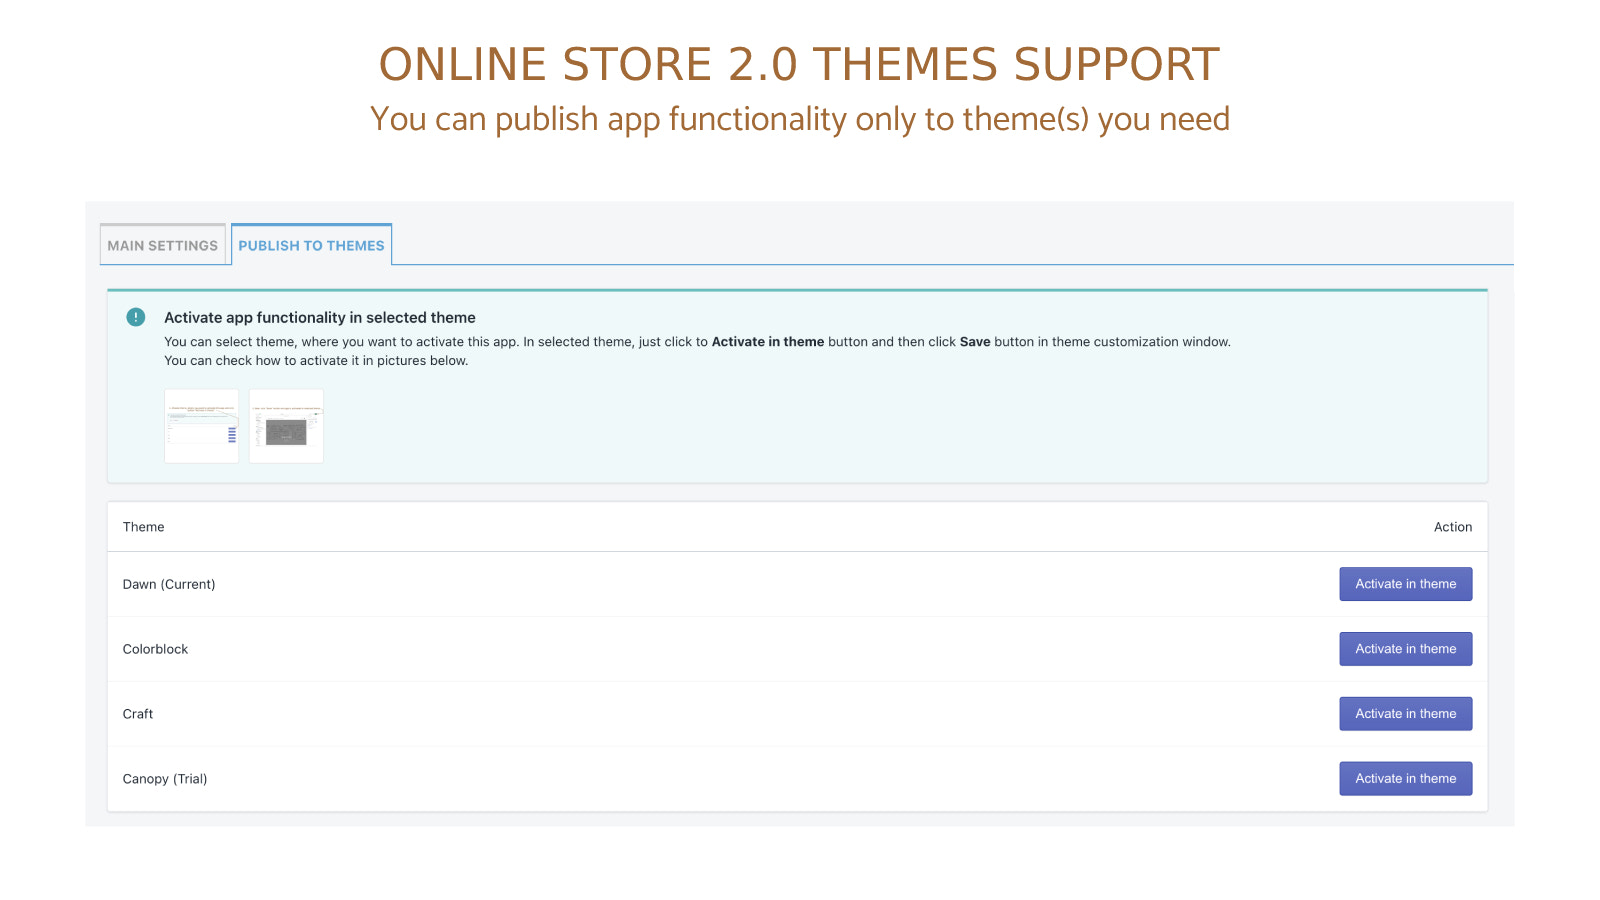 ONLINE STORE 2.0 themes